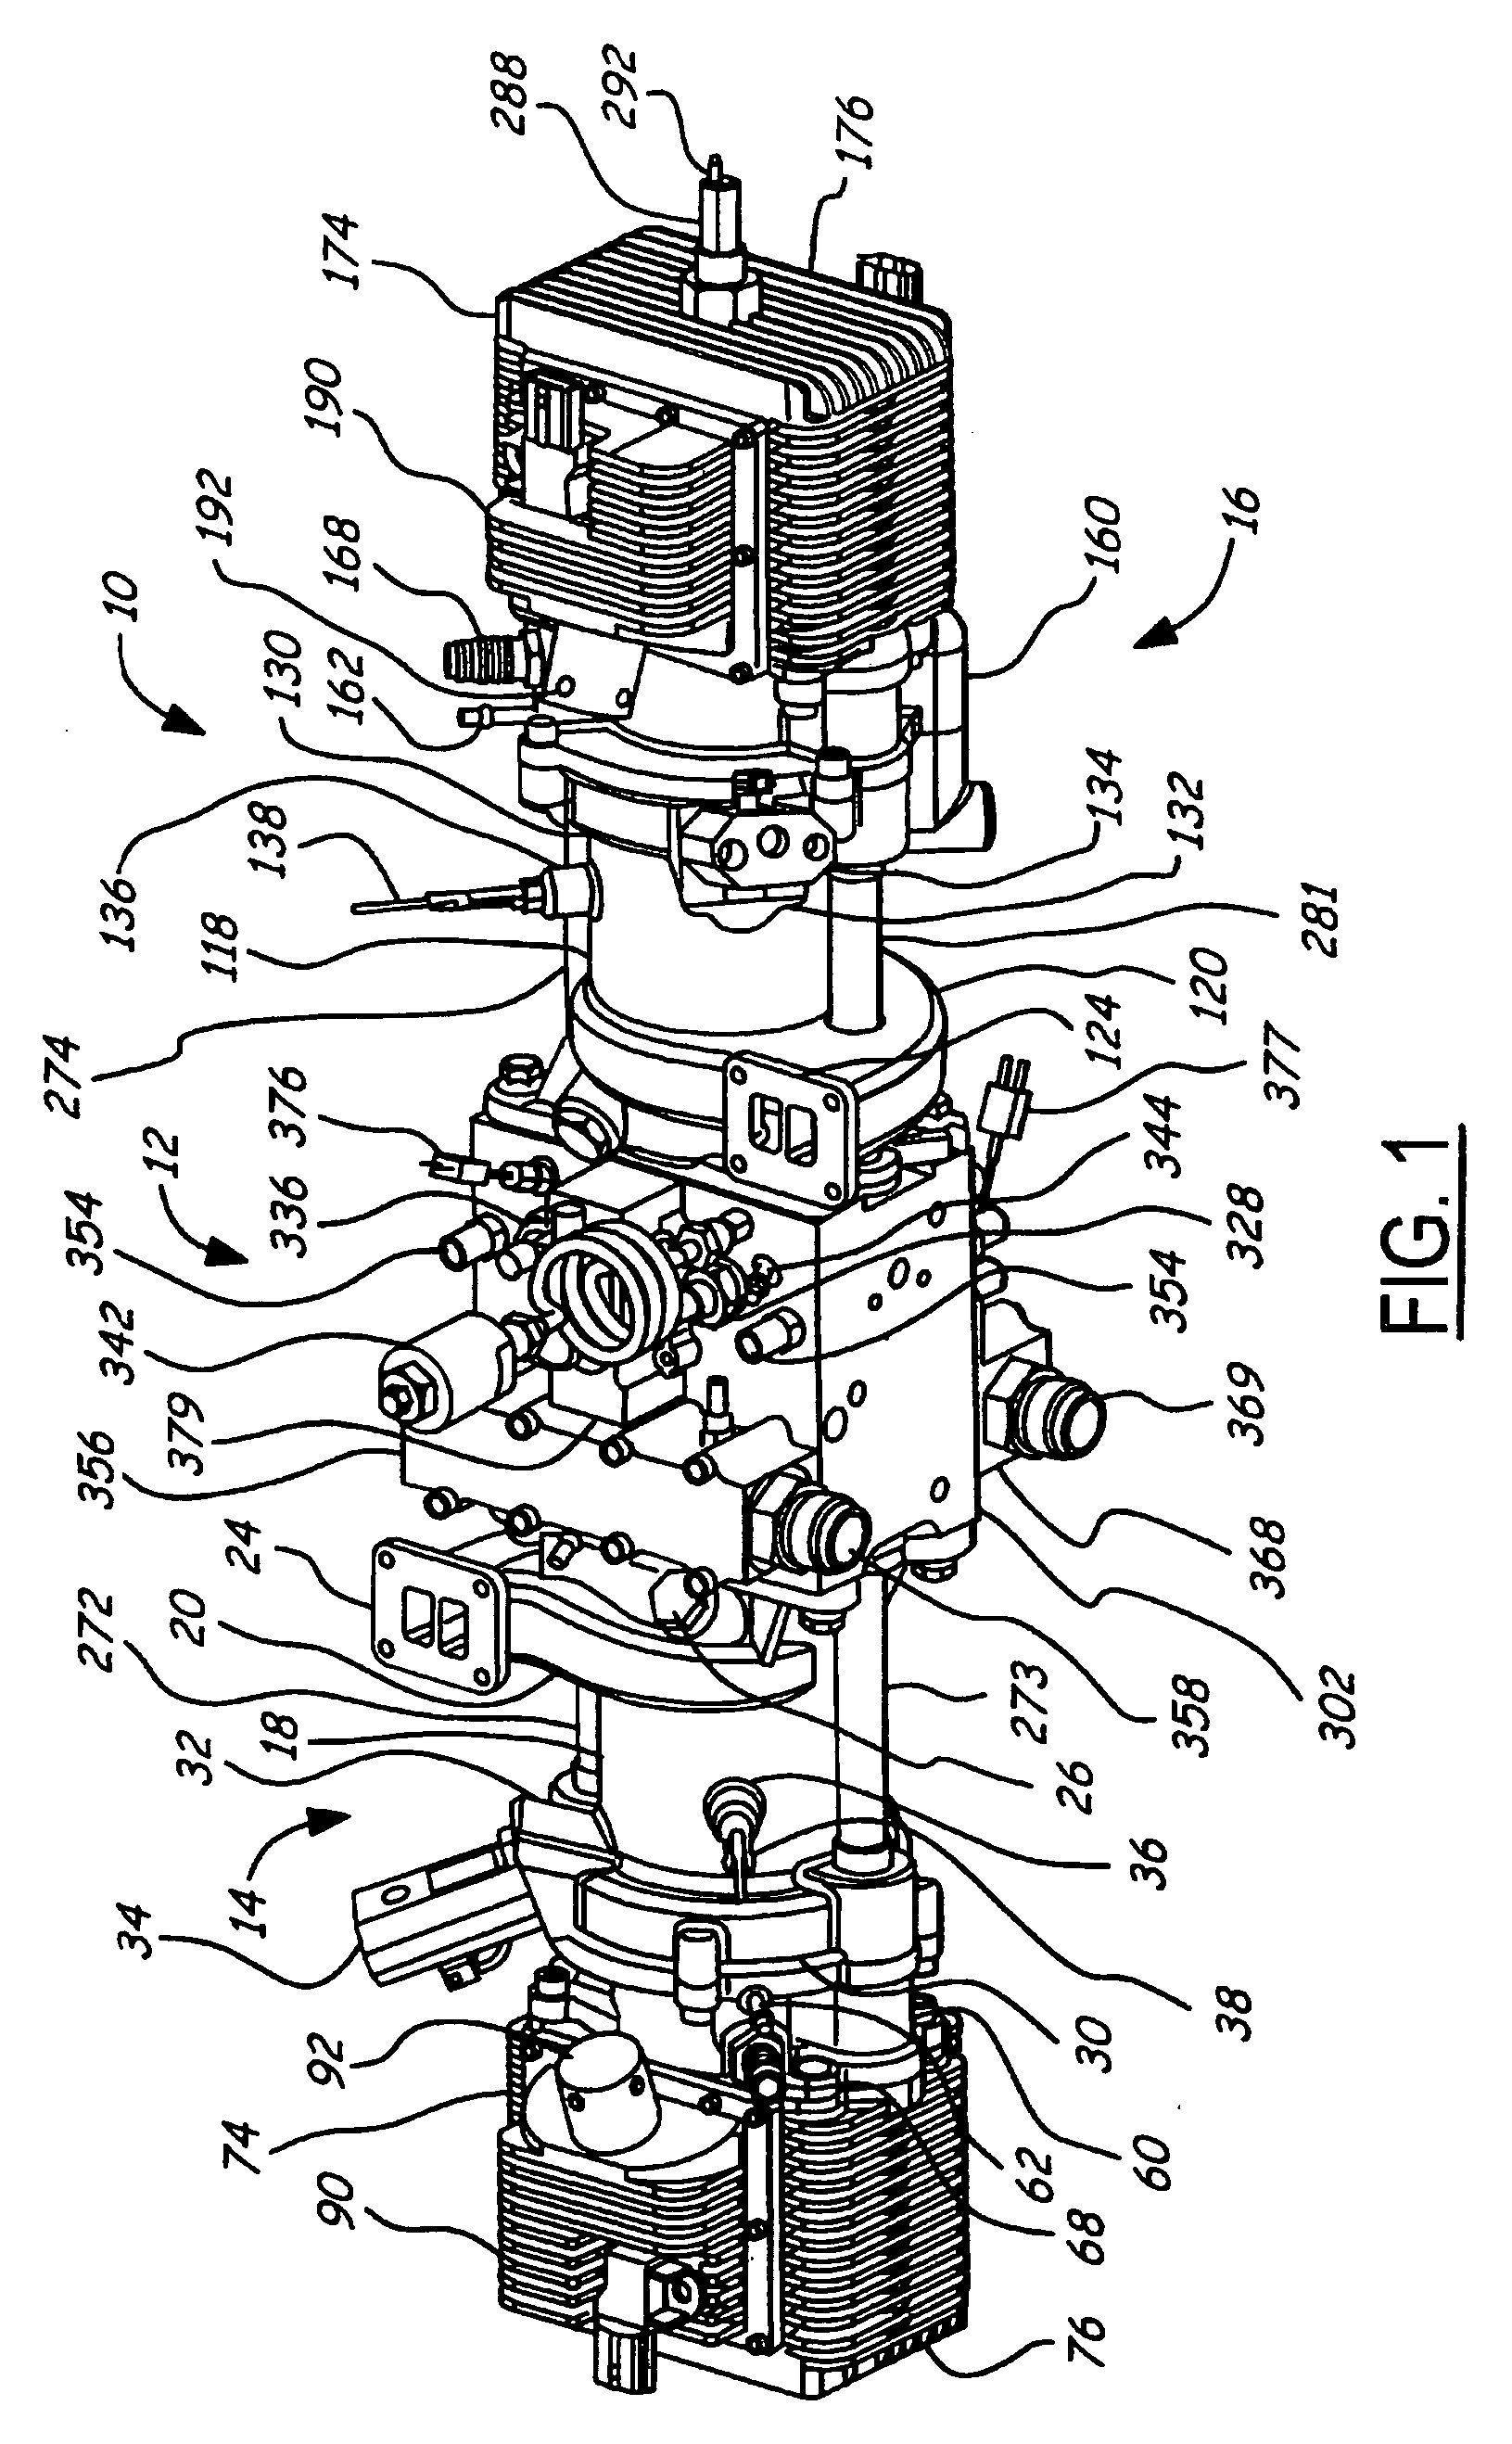 Exhaust gas recirculation for a free piston engine